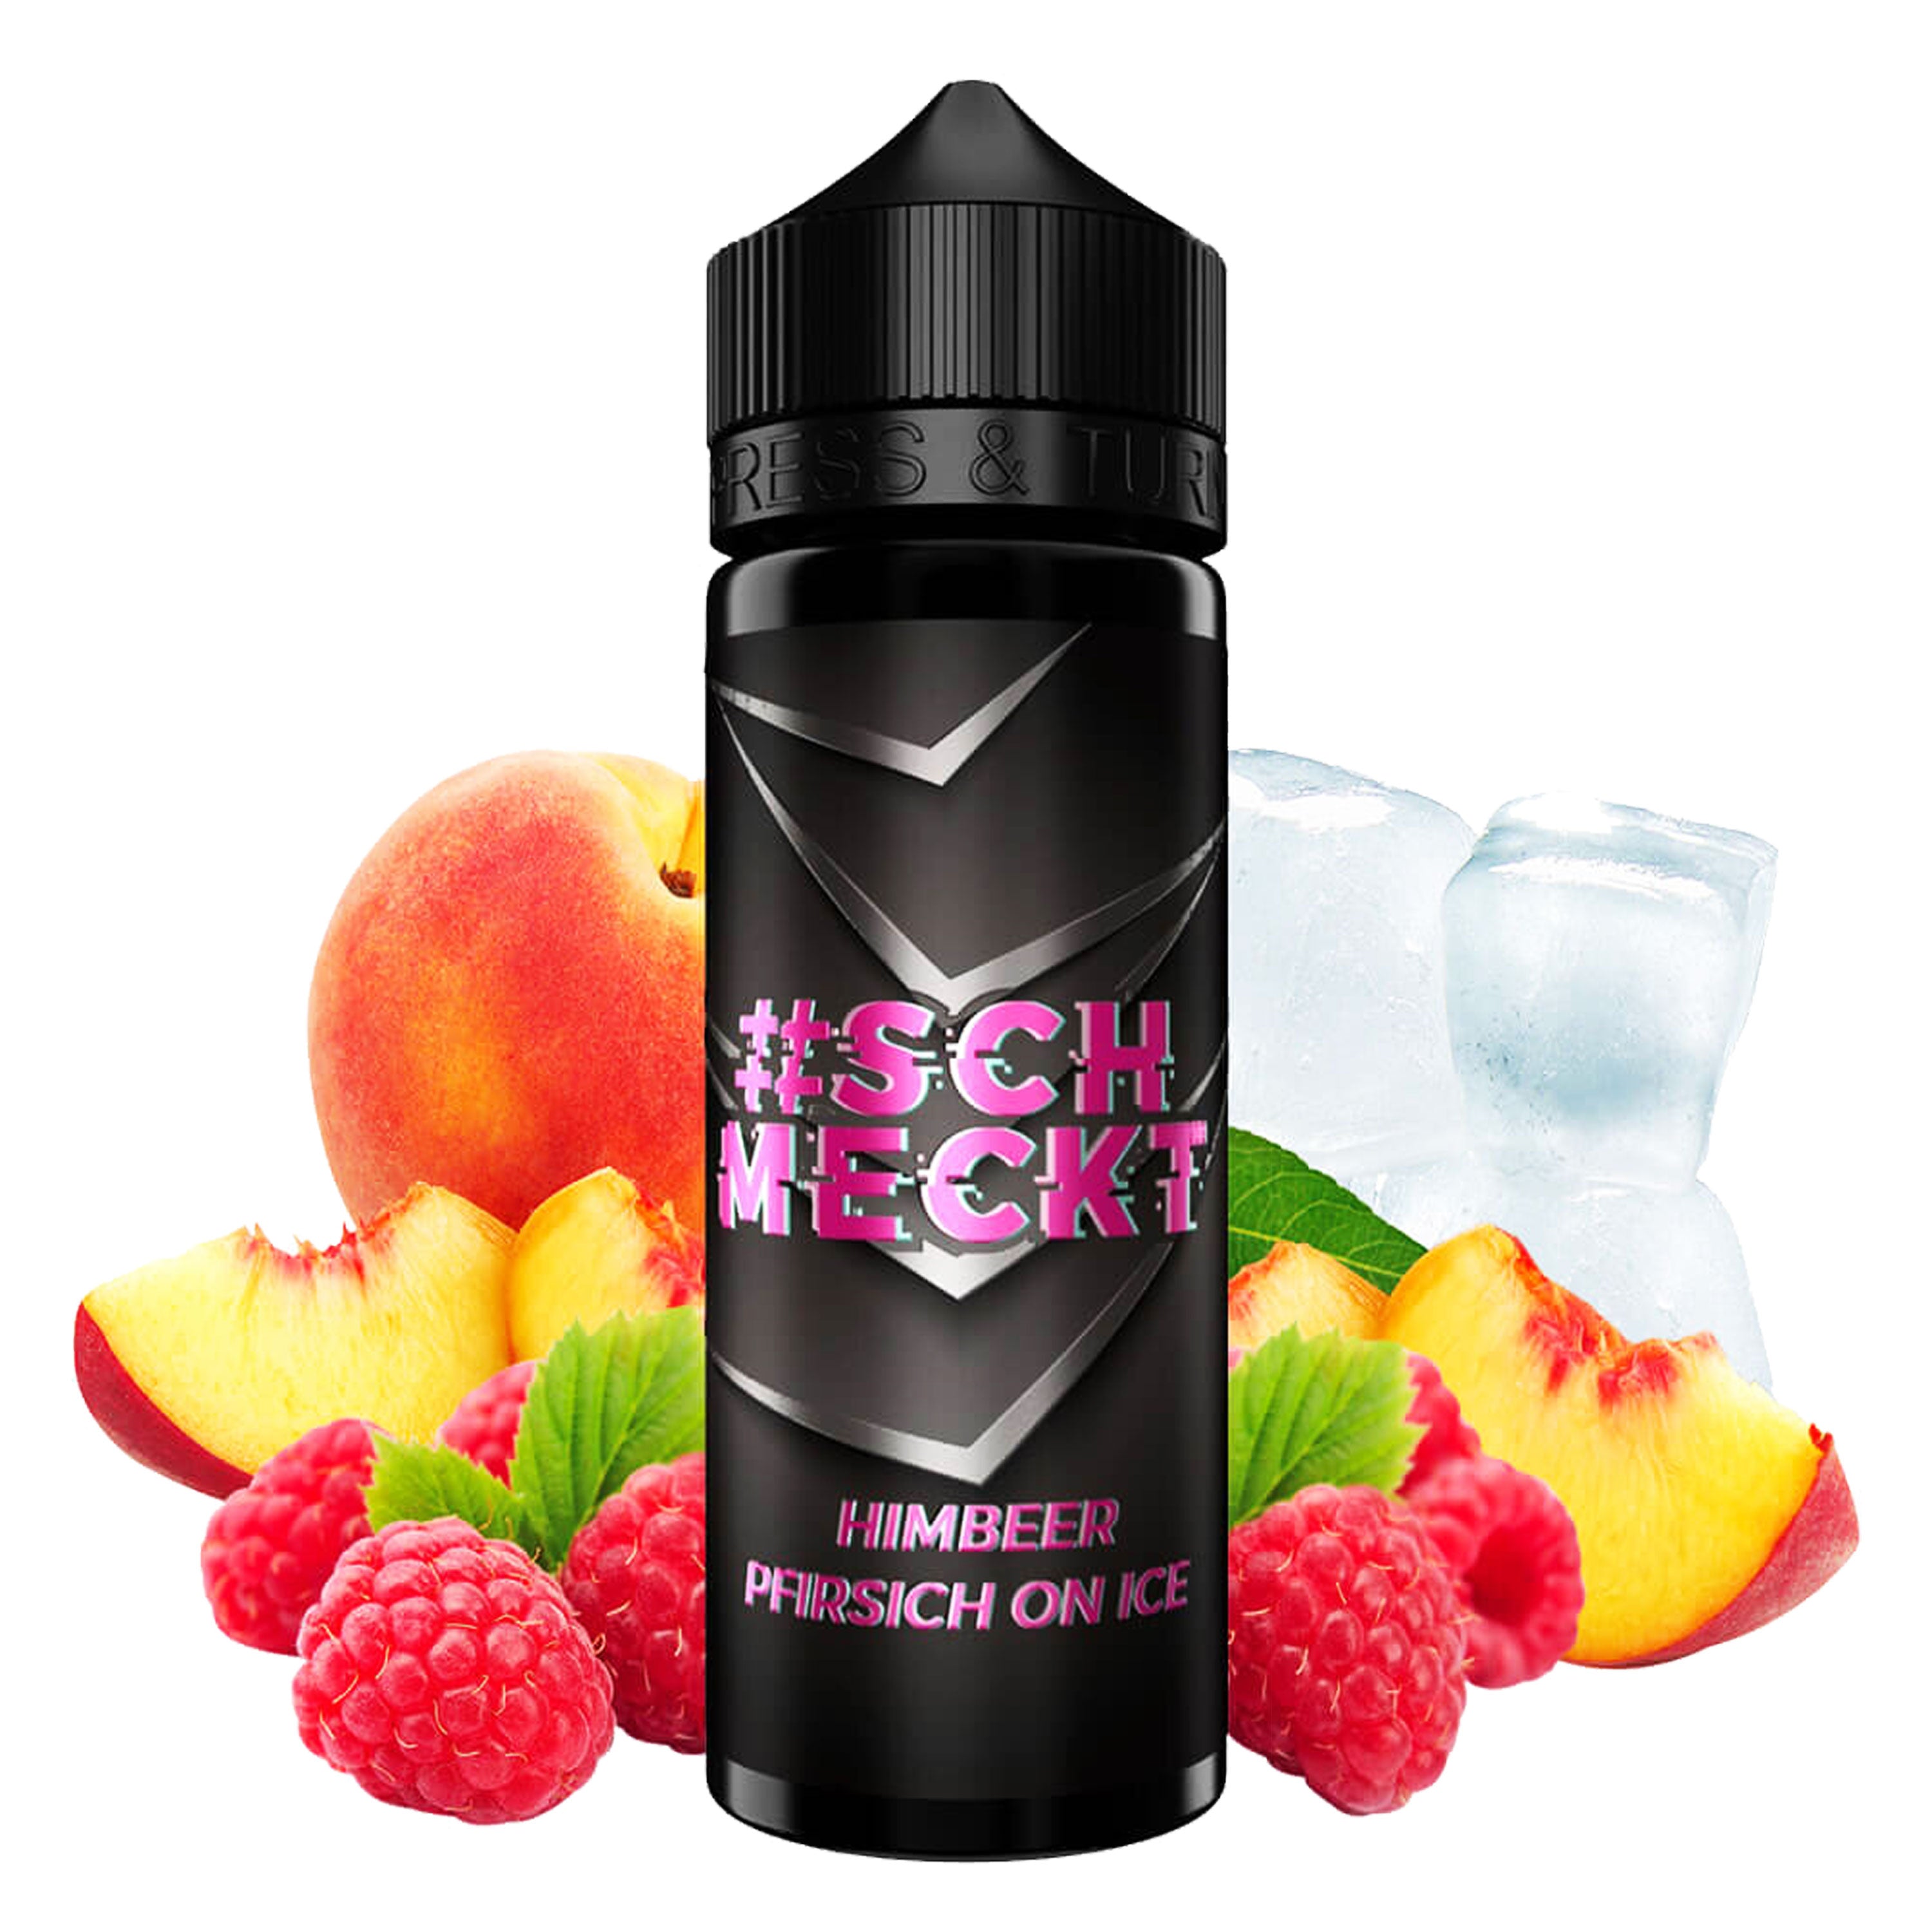 #Schmeckt - Himbeer Pfirsich on Ice (10 ml in 120 ml LF) - Longfill-Aroma